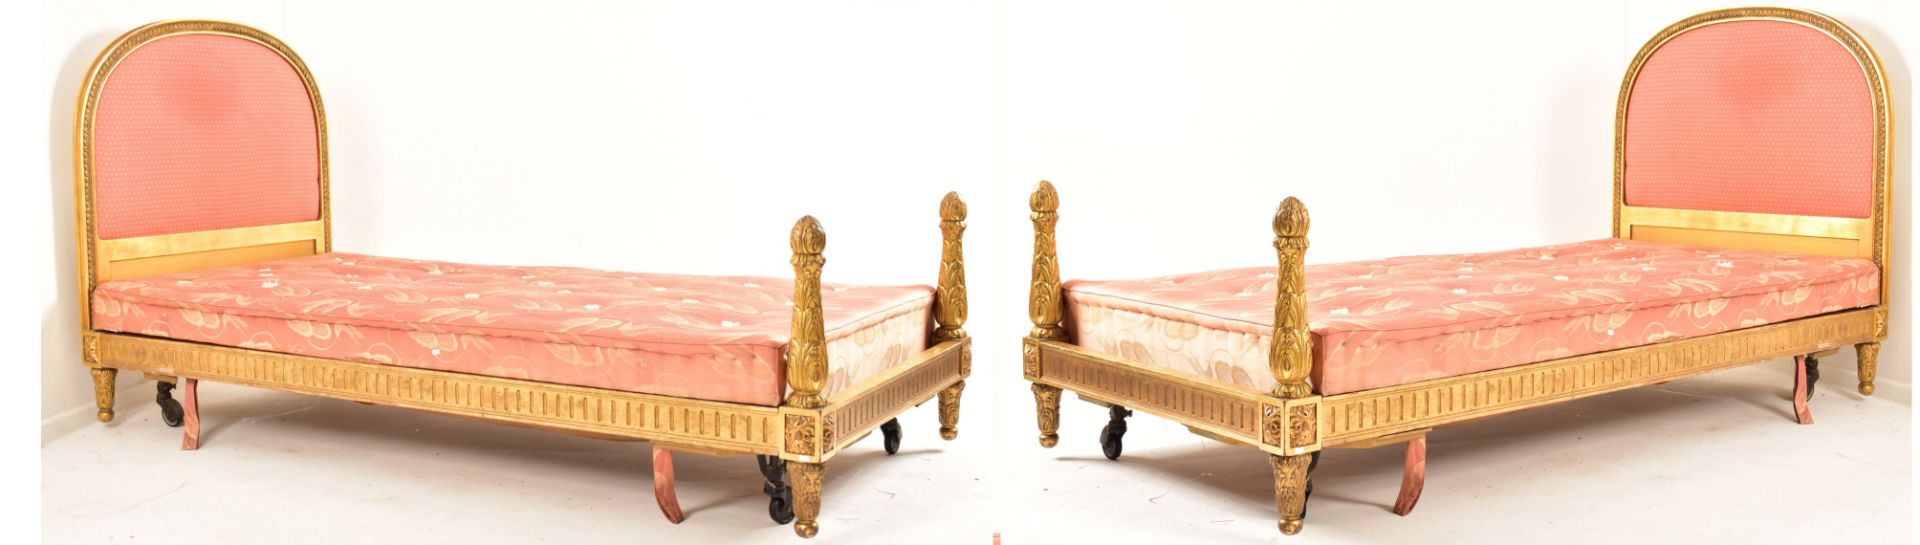 PAIR OF FRENCH 19TH CENTURY GILT WOOD SINGLE BED FRAMES